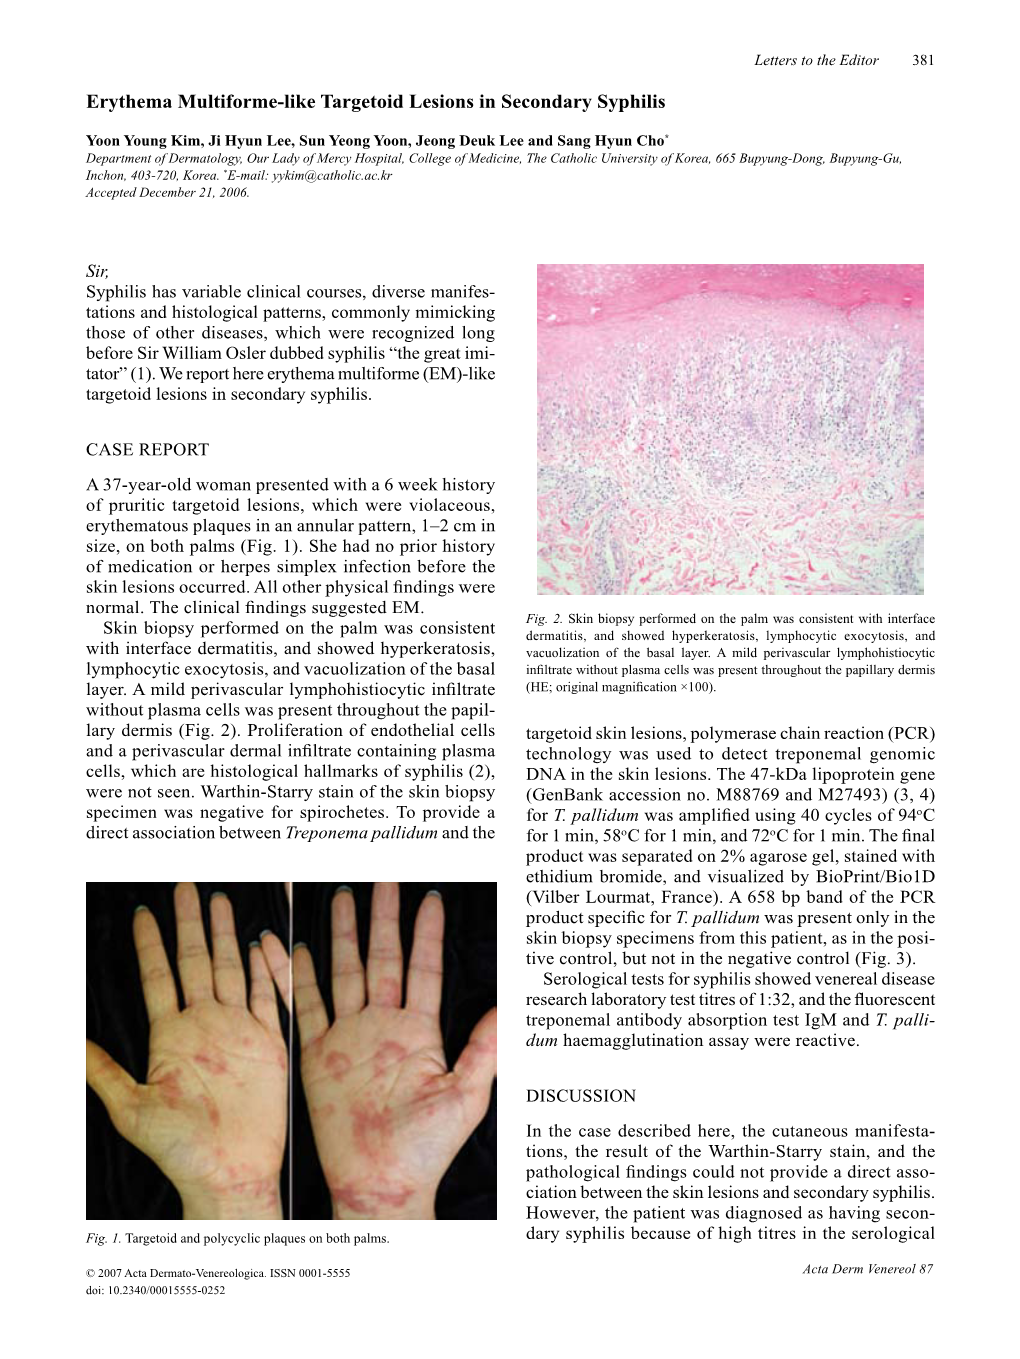 Erythema Multiforme-Like Targetoid Lesions in Secondary Syphilis